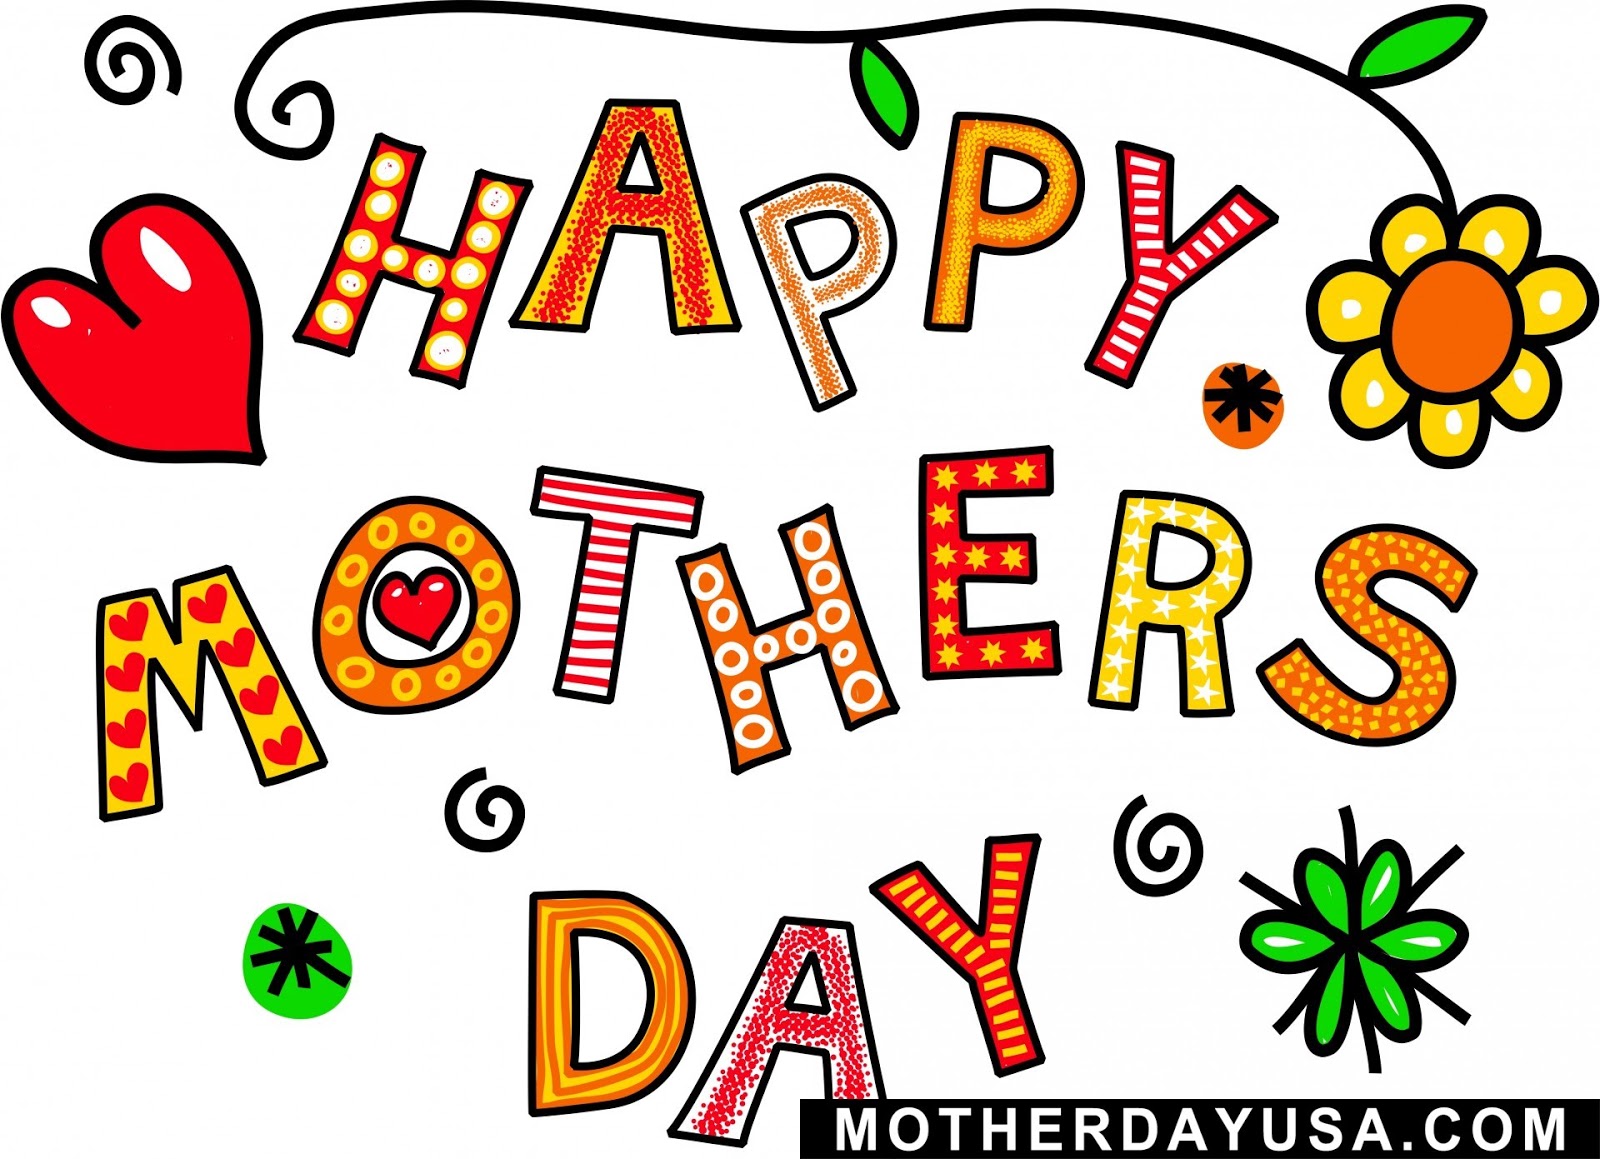 Happy Mothers Day Quotes From Daughter - HD Wallpaper 